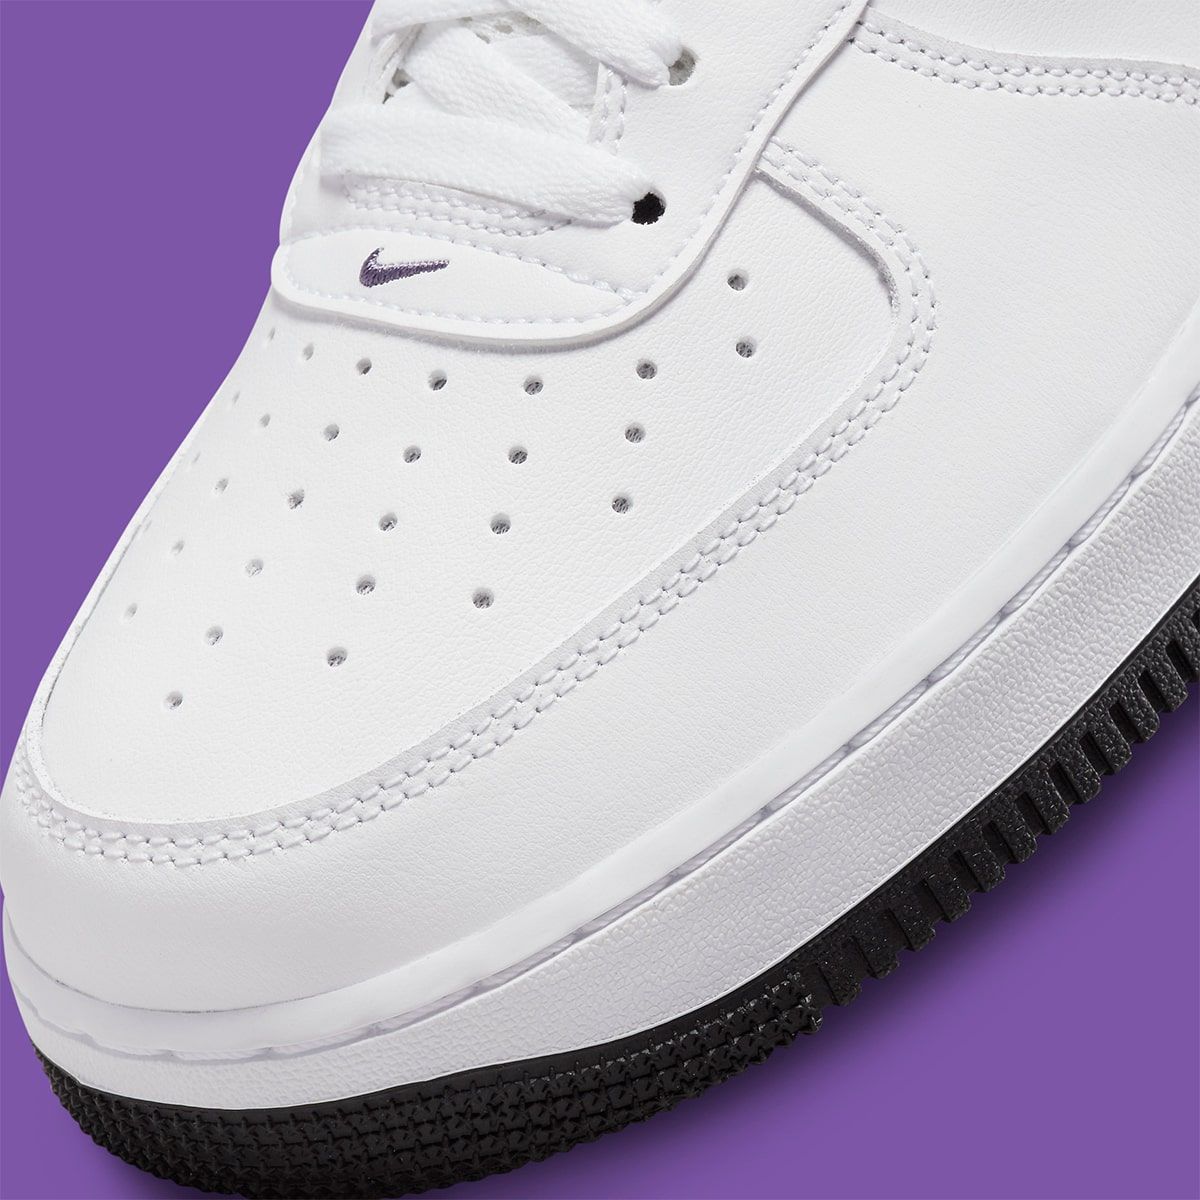 Nike Air Force 1 Low Hoops DH7440-001 DH7440-100